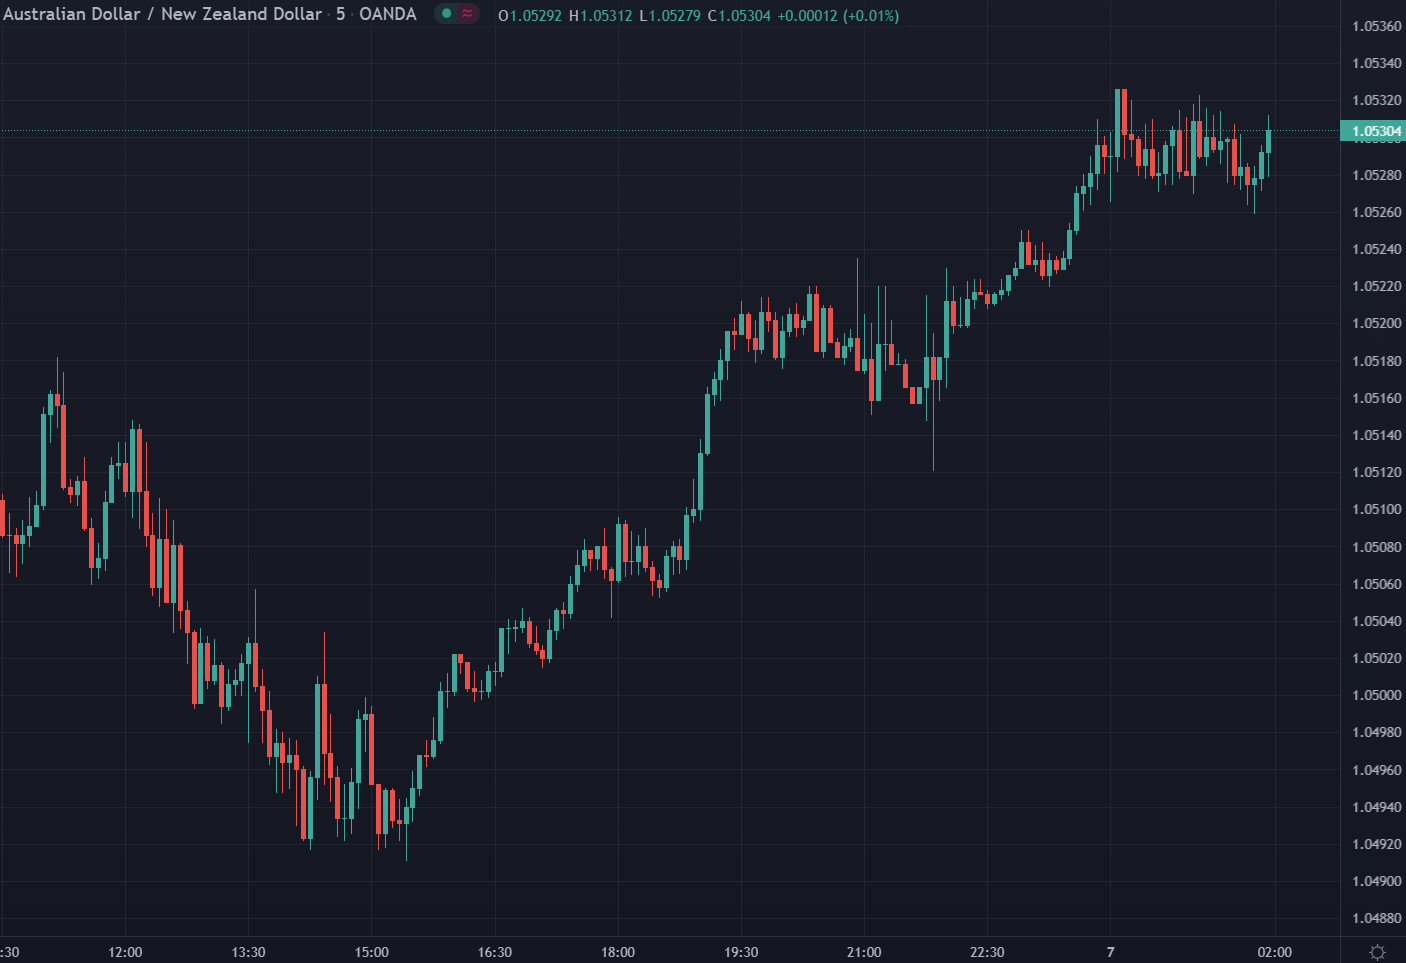 While only a 20 or so point range AUD/USD is a winner on the day. 